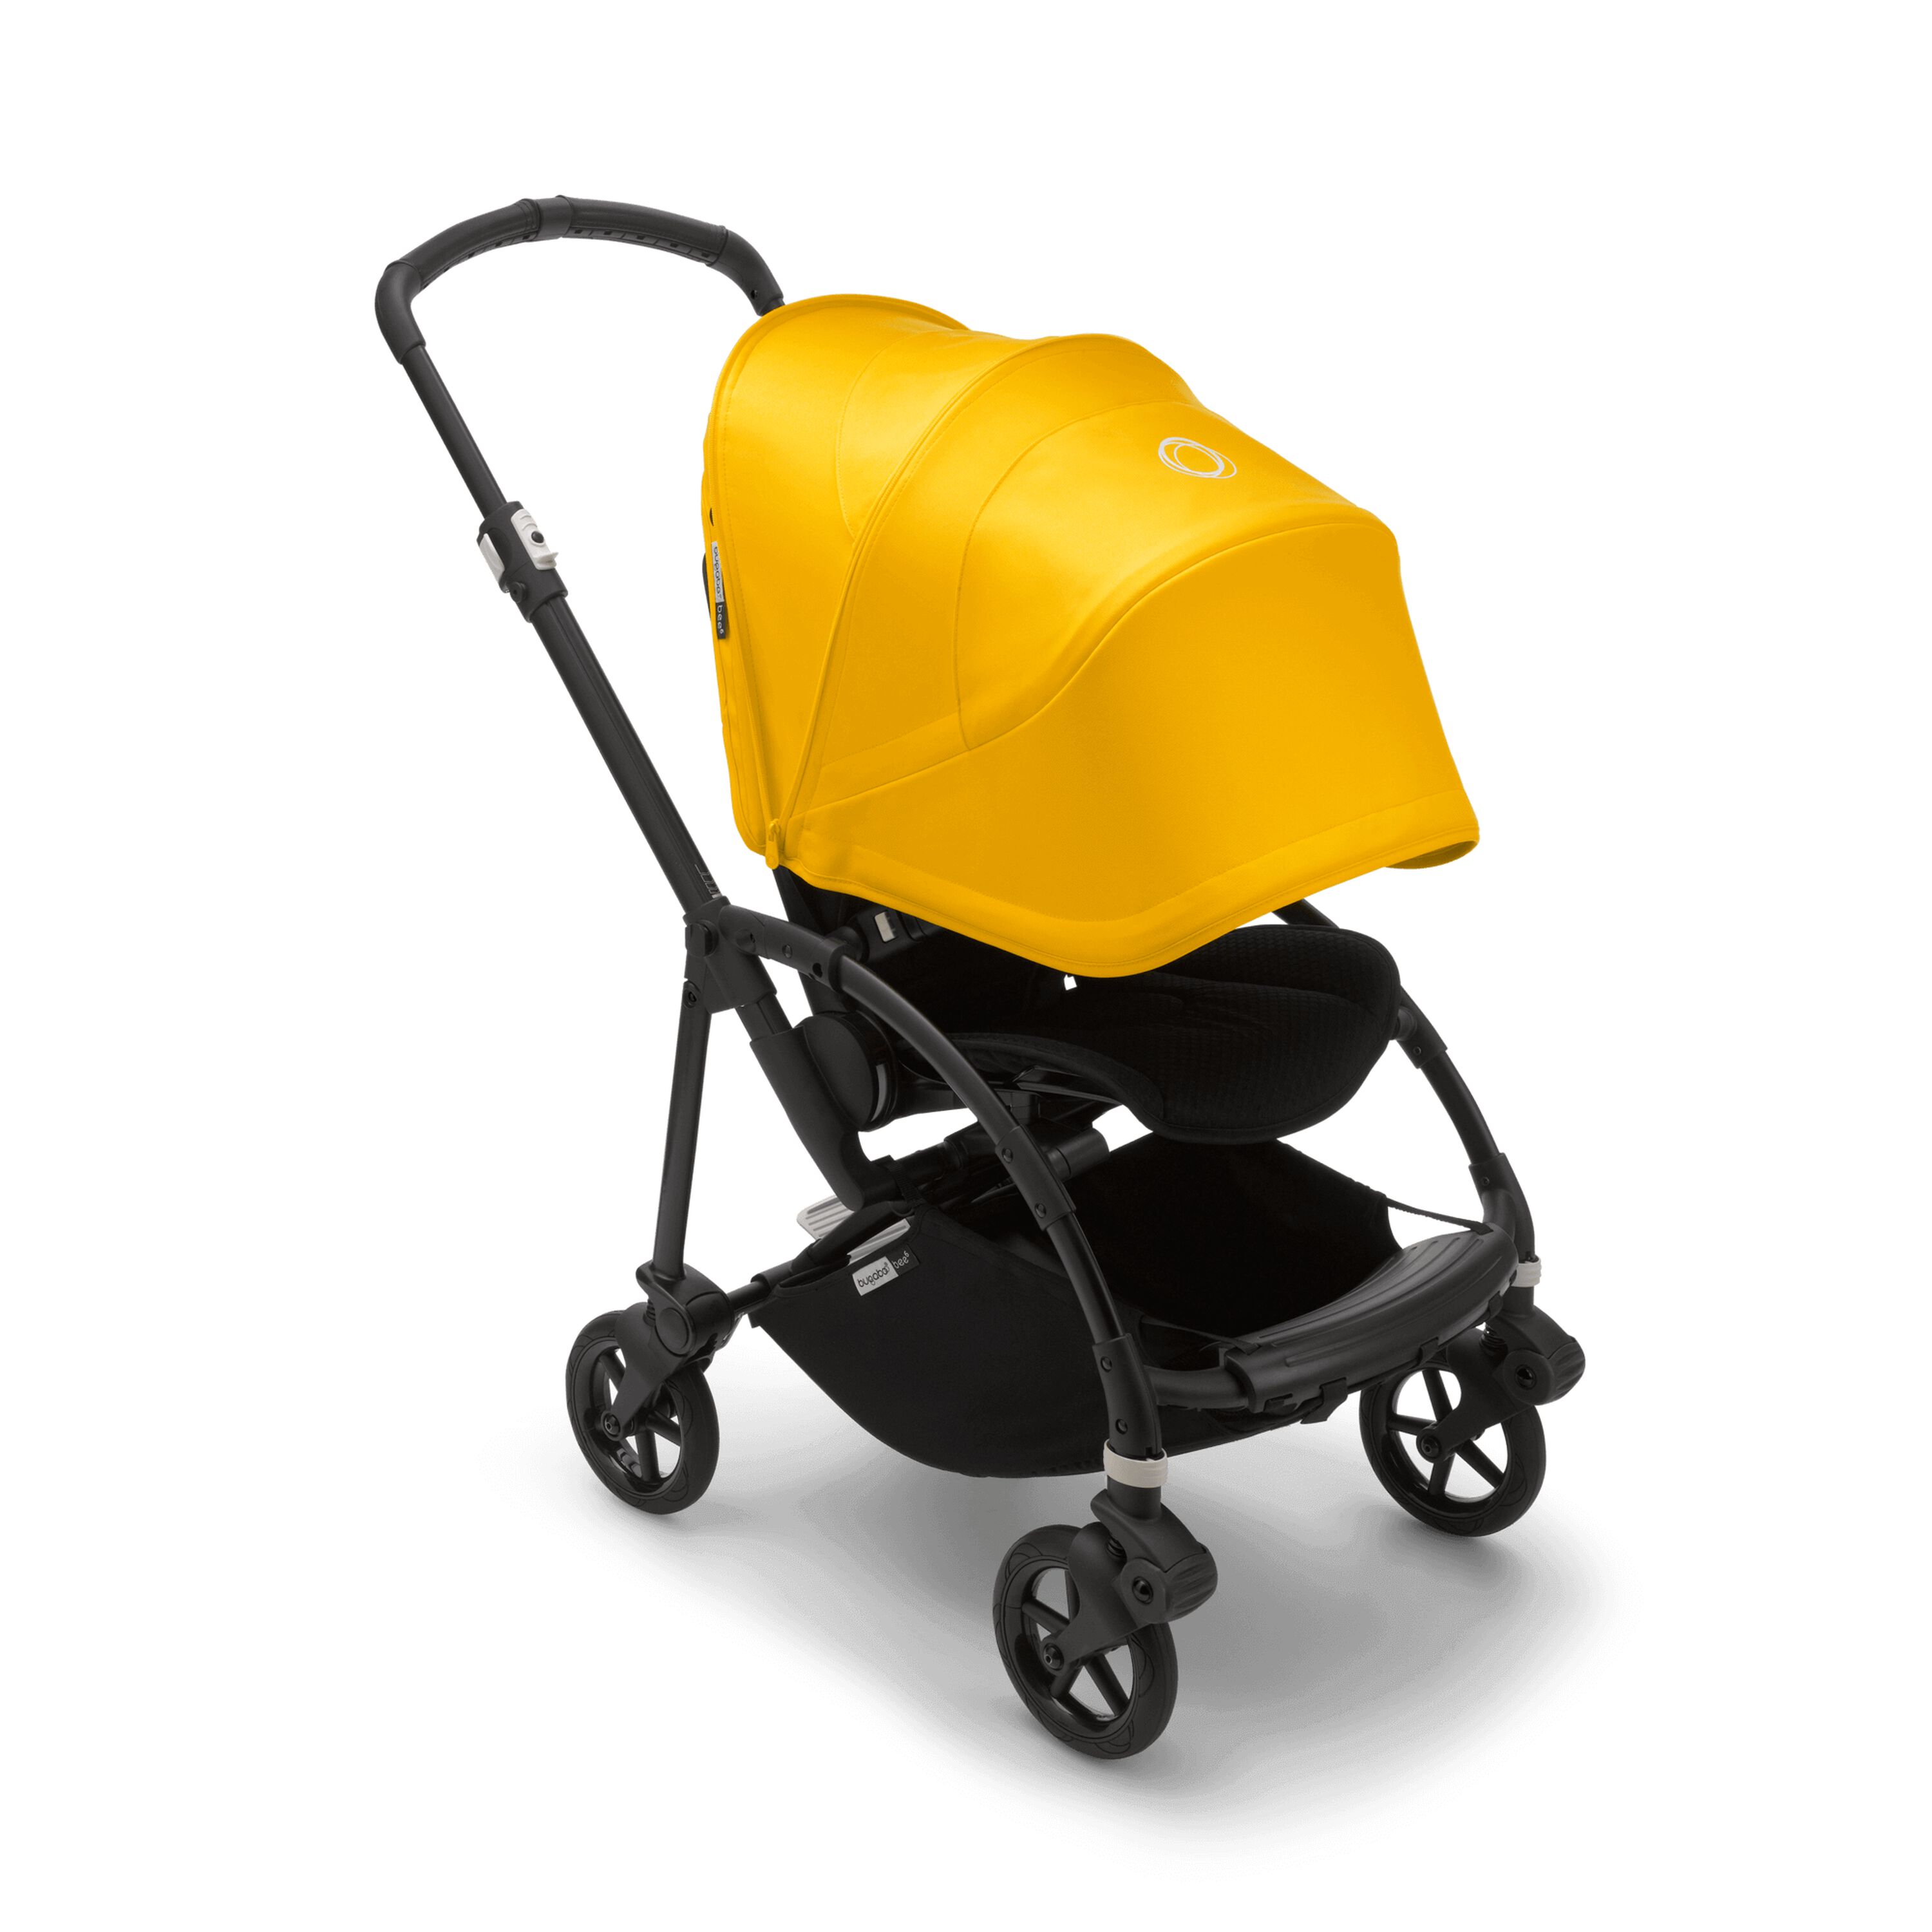 Beat the streets in comfort and style with the Bugaboo Bee 6